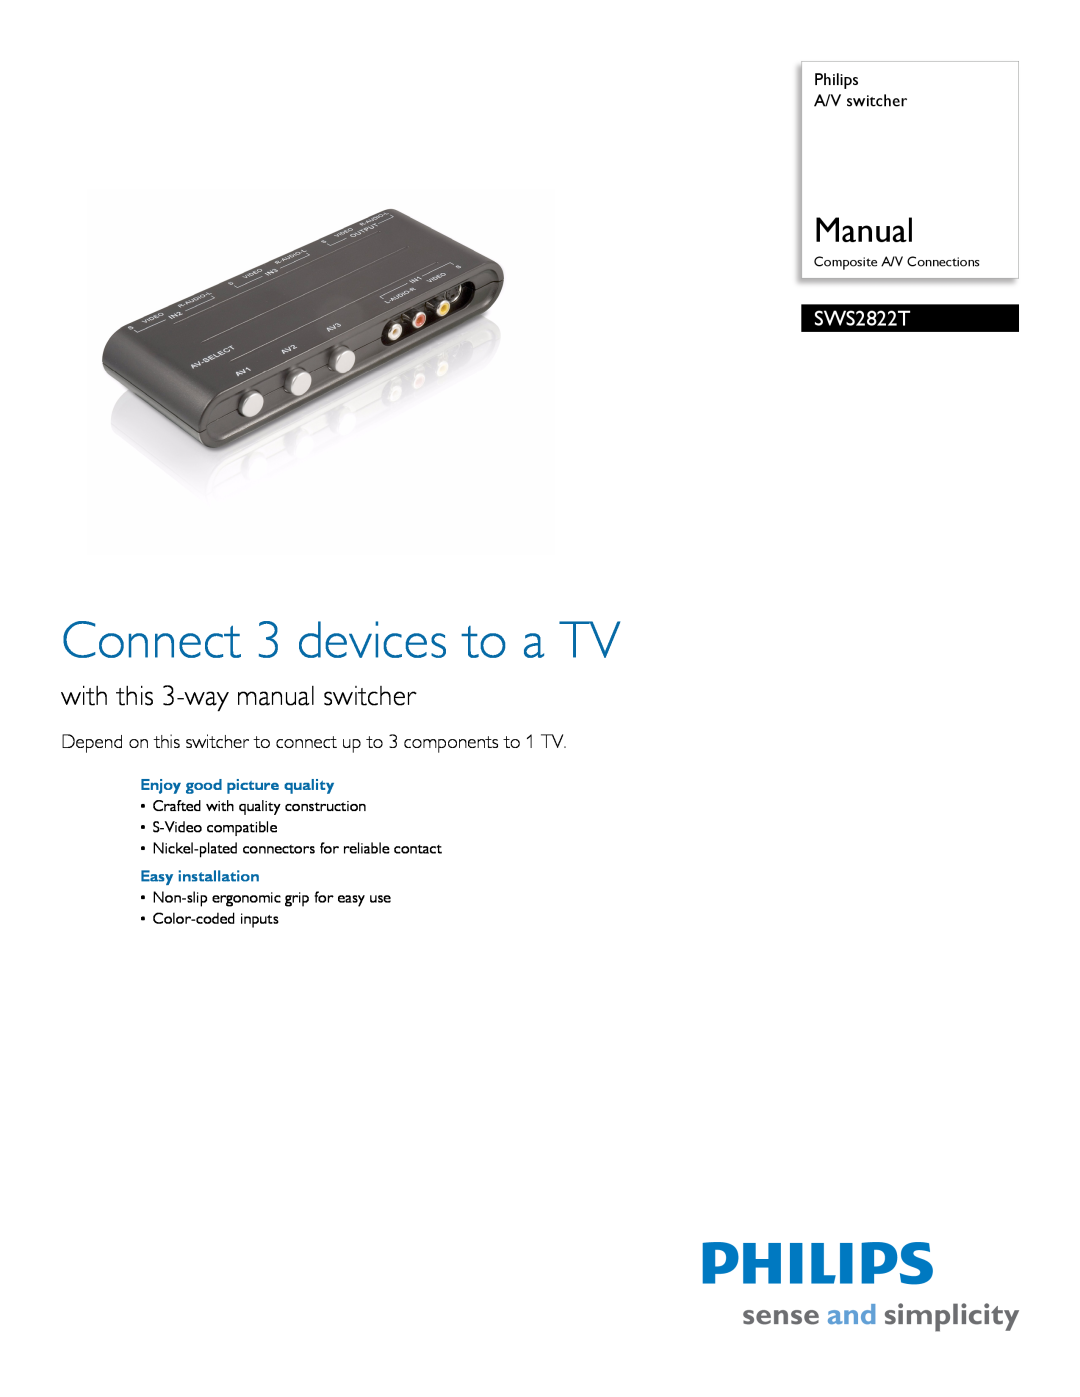 Philips SWS2822T manual Philips A/V switcher, Enjoy good picture quality, Easy installation, Connect 3 devices to a TV 